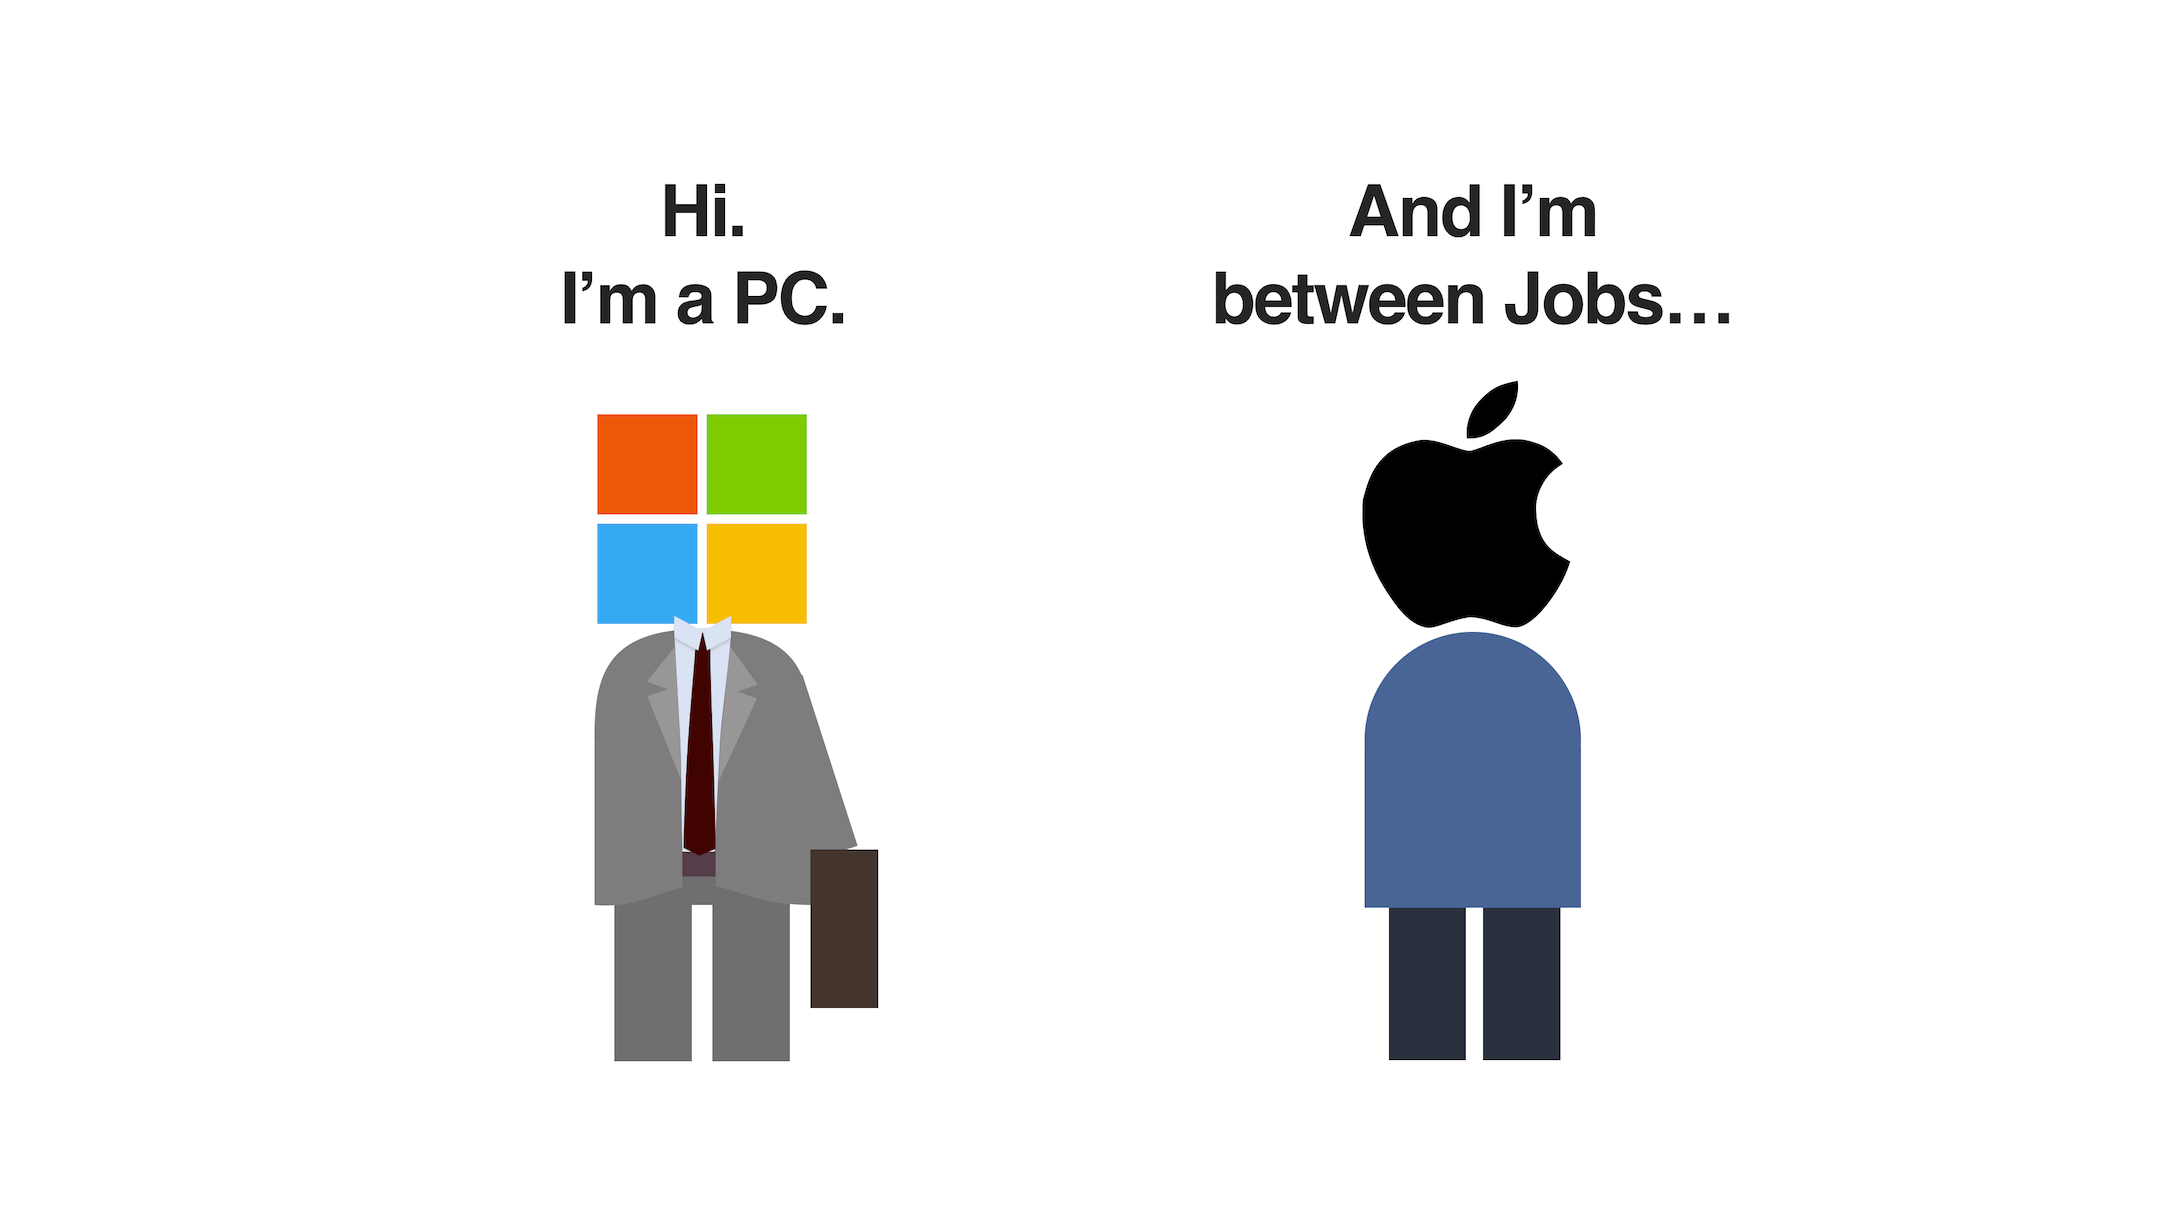 PC guy and Mac guy standing next each other